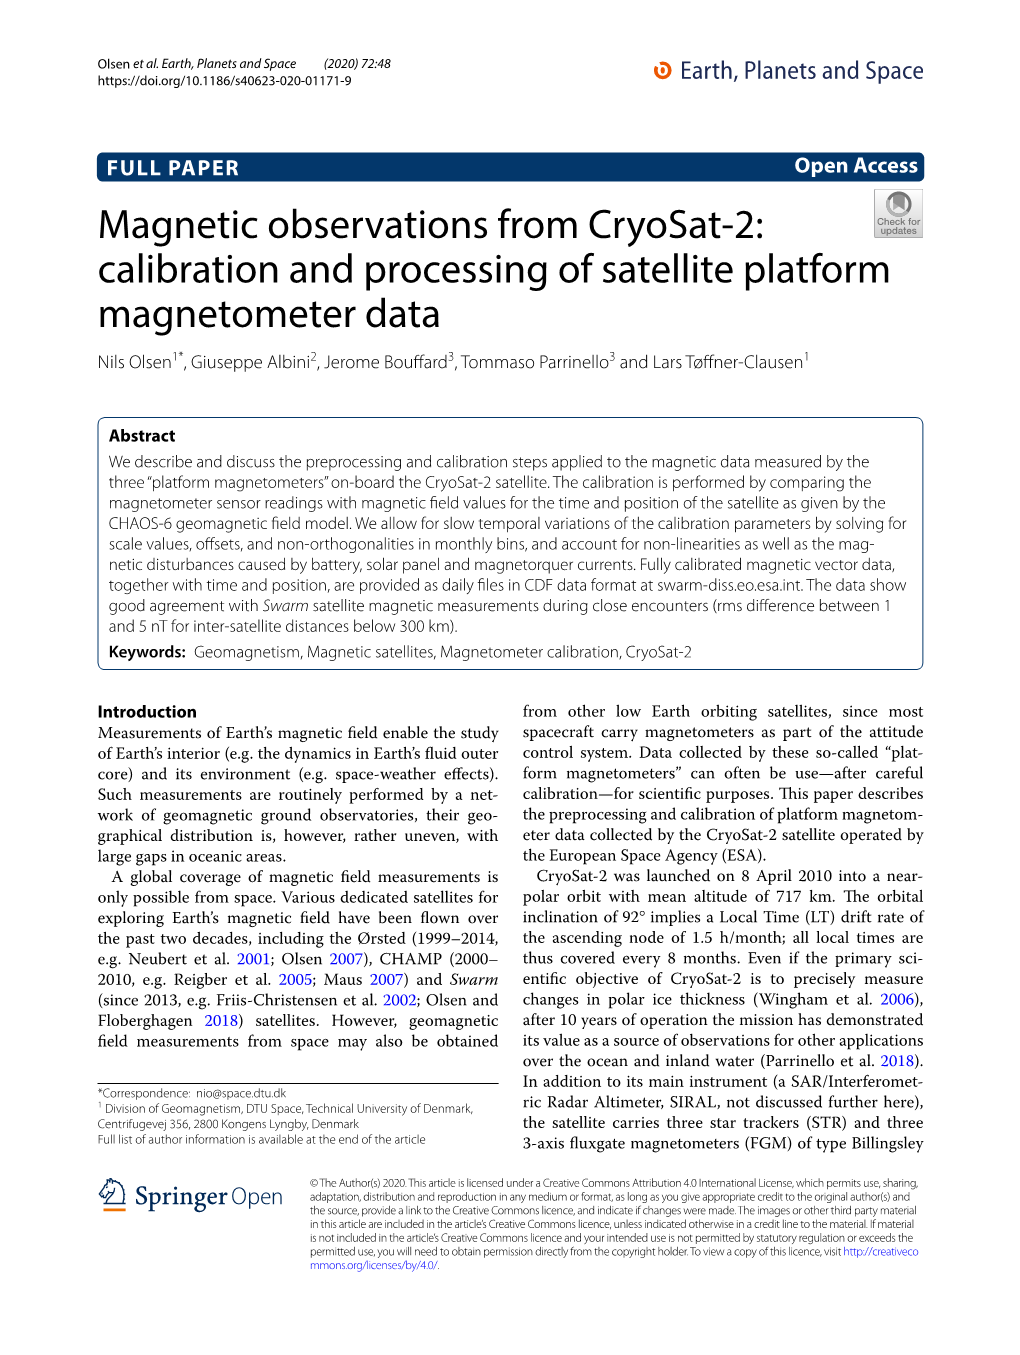 Magnetic Observations from Cryosat-2